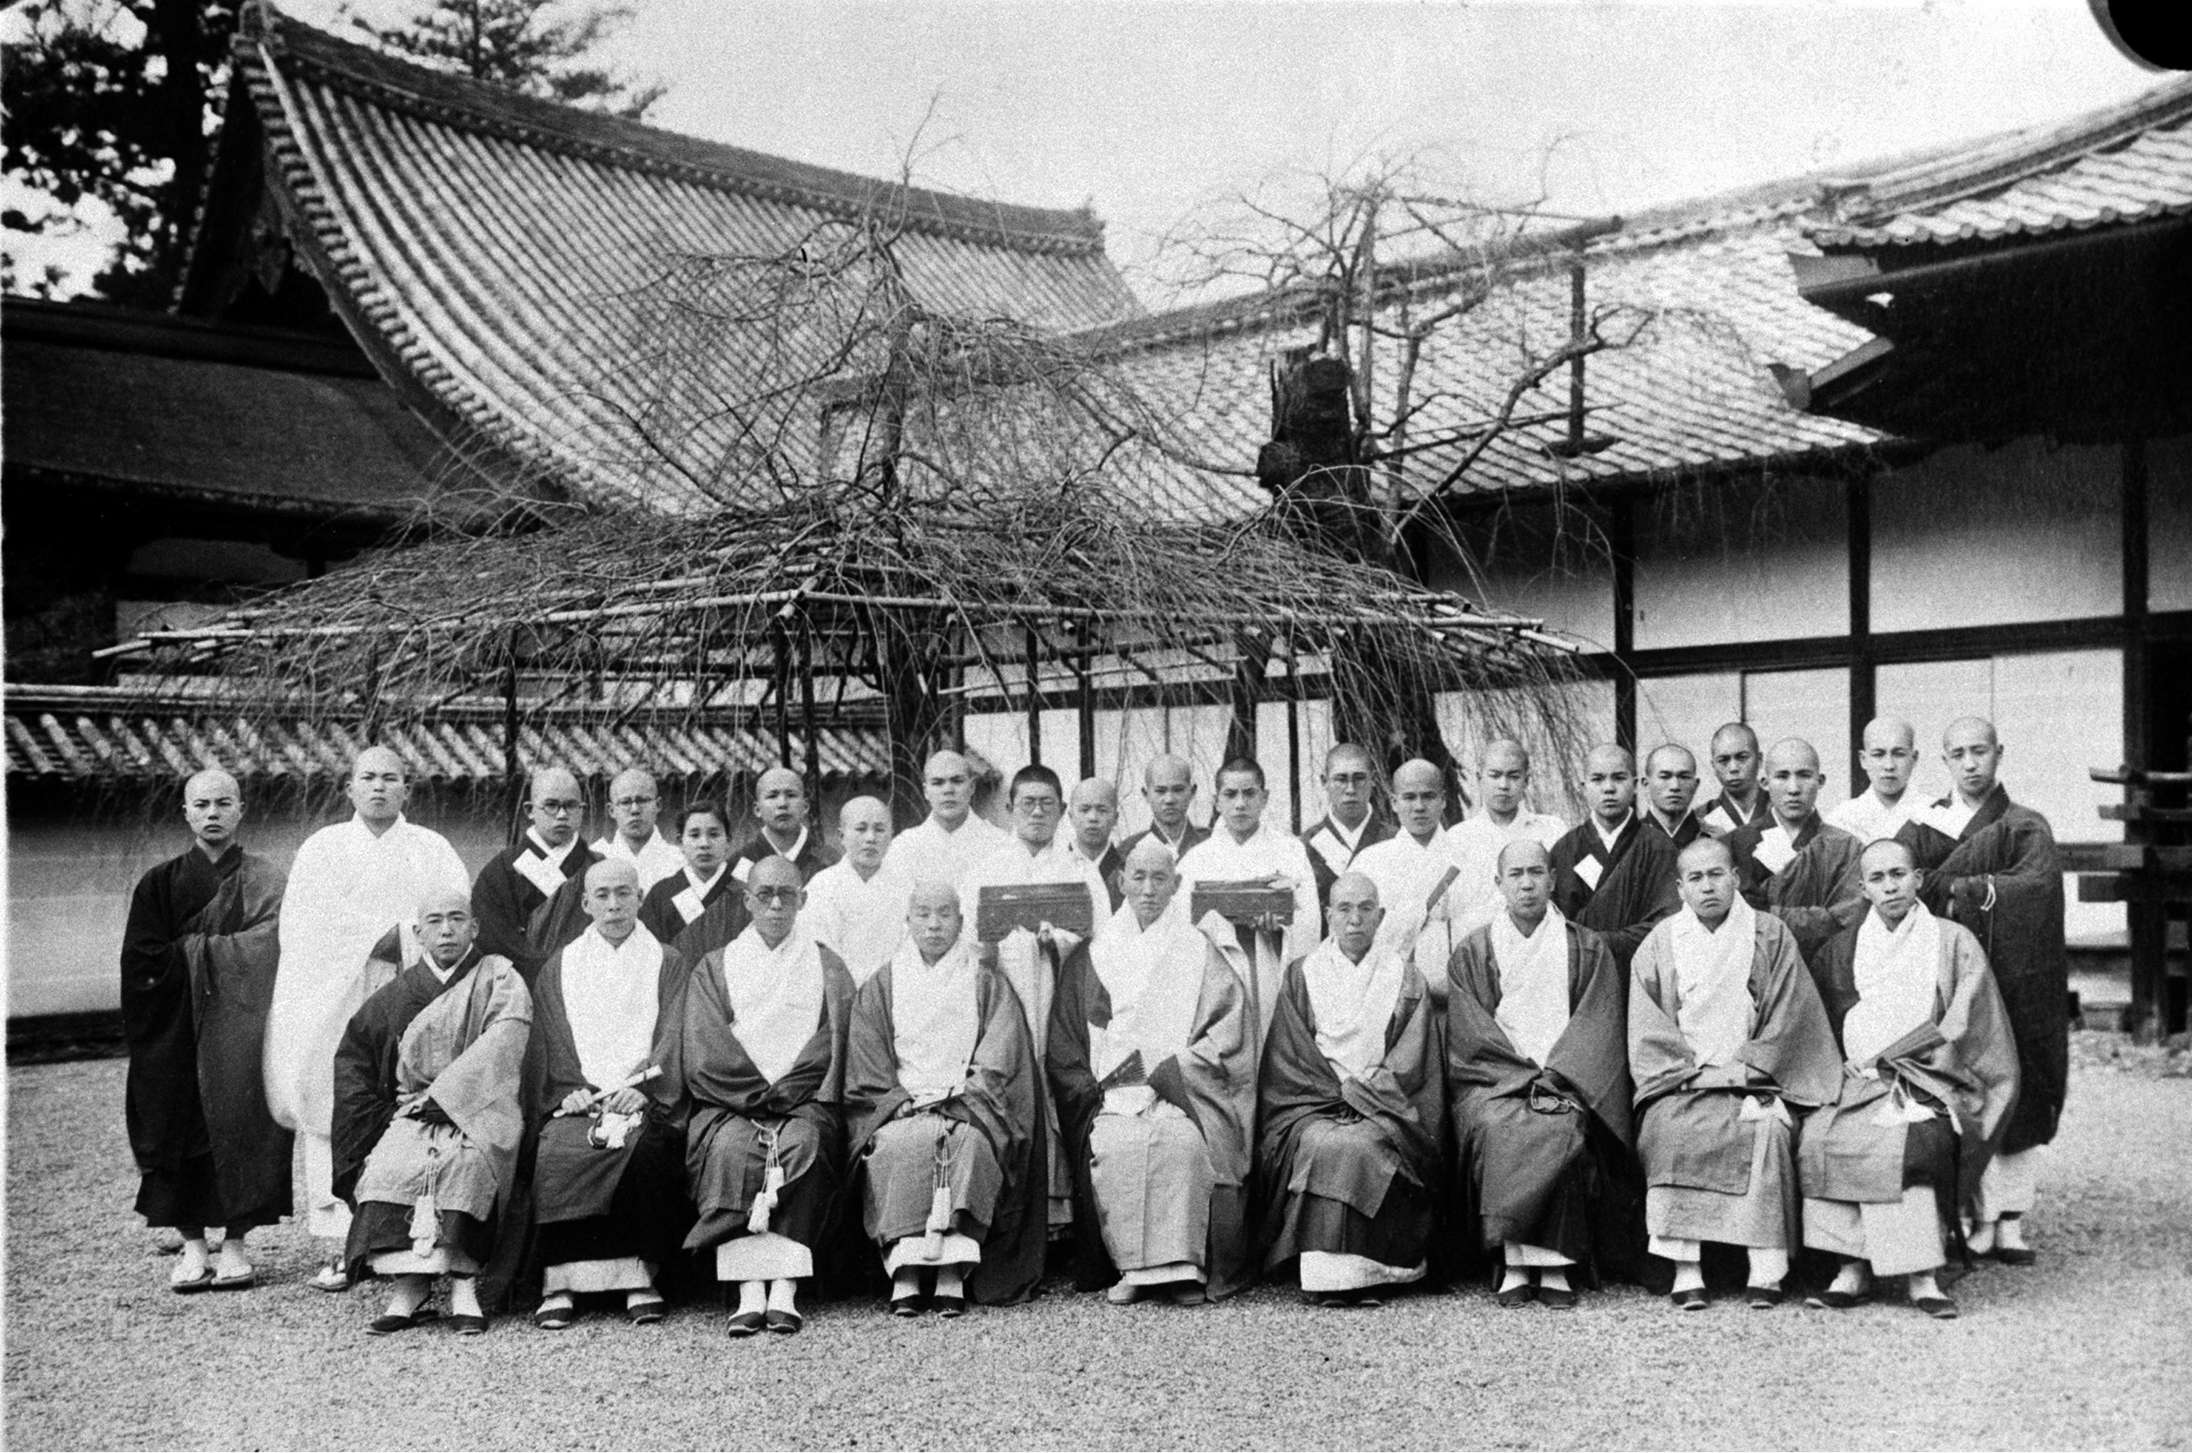 A group of Buddhist priests wearing formal robes, some seated, the rest standing behind, pose for a portrait in the graveled courtyard of a large temple with tiled roofs.